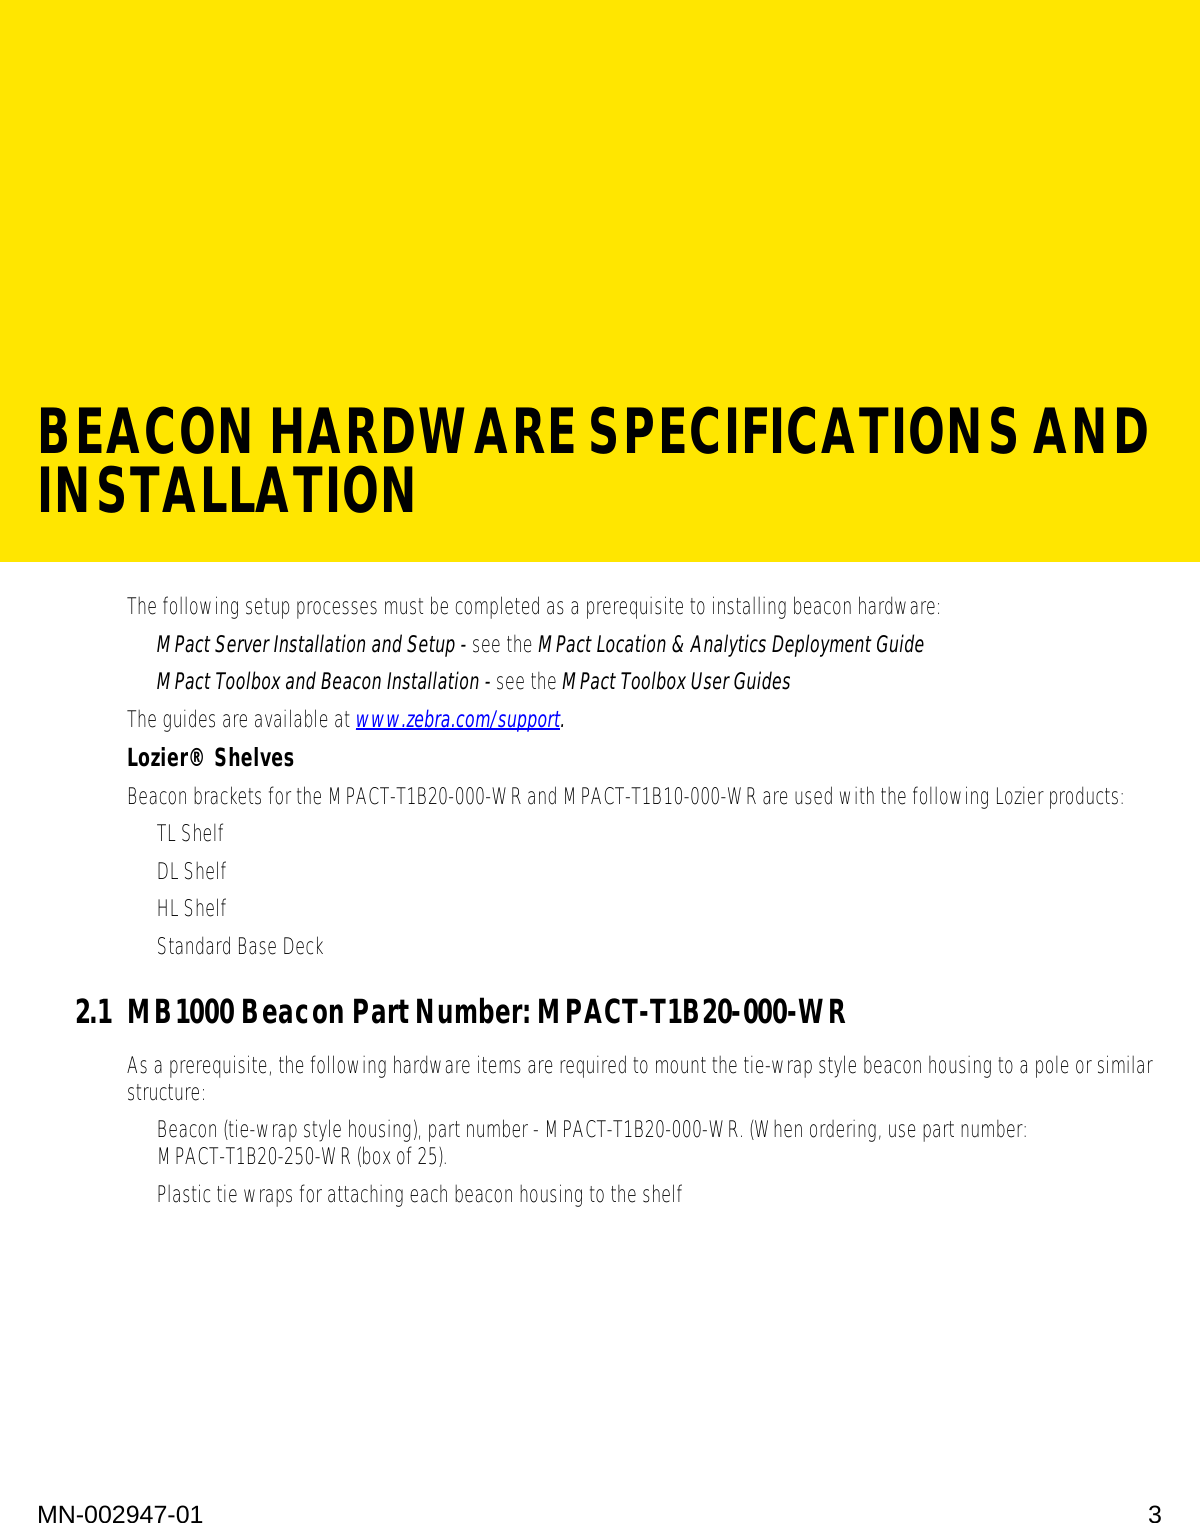 BEACON HARDWARE SPECIFICATIONS AND INSTALLATIONMN-002947-01 3The following setup processes must be completed as a prerequisite to installing beacon hardware:•MPact Server Installation and Setup - see the MPact Location &amp; Analytics Deployment Guide•MPact Toolbox and Beacon Installation - see the MPact Toolbox User Guides The guides are available at www.zebra.com/support.Lozier® ShelvesBeacon brackets for the MPACT-T1B20-000-WR and MPACT-T1B10-000-WR are used with the following Lozier products:• TL Shelf•DL Shelf•HL Shelf• Standard Base Deck2.1 MB1000 Beacon Part Number: MPACT-T1B20-000-WRAs a prerequisite, the following hardware items are required to mount the tie-wrap style beacon housing to a pole or similar structure:• Beacon (tie-wrap style housing), part number - MPACT-T1B20-000-WR. (When ordering, use part number: MPACT-T1B20-250-WR (box of 25).• Plastic tie wraps for attaching each beacon housing to the shelf